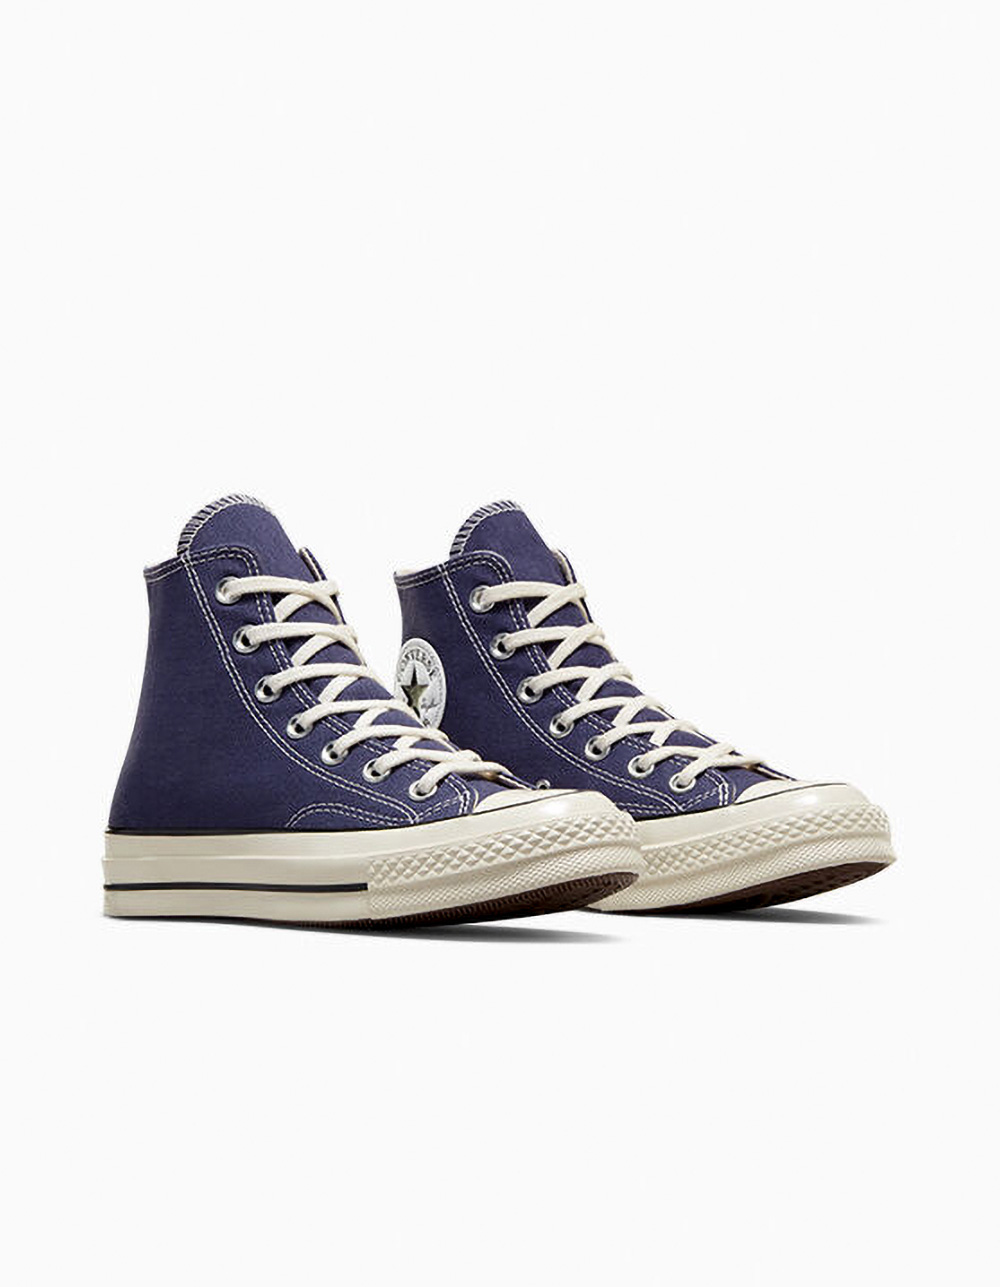 CONVERSE Chuck 70 High Top Shoes - UNCHARTED WATERS | Tillys